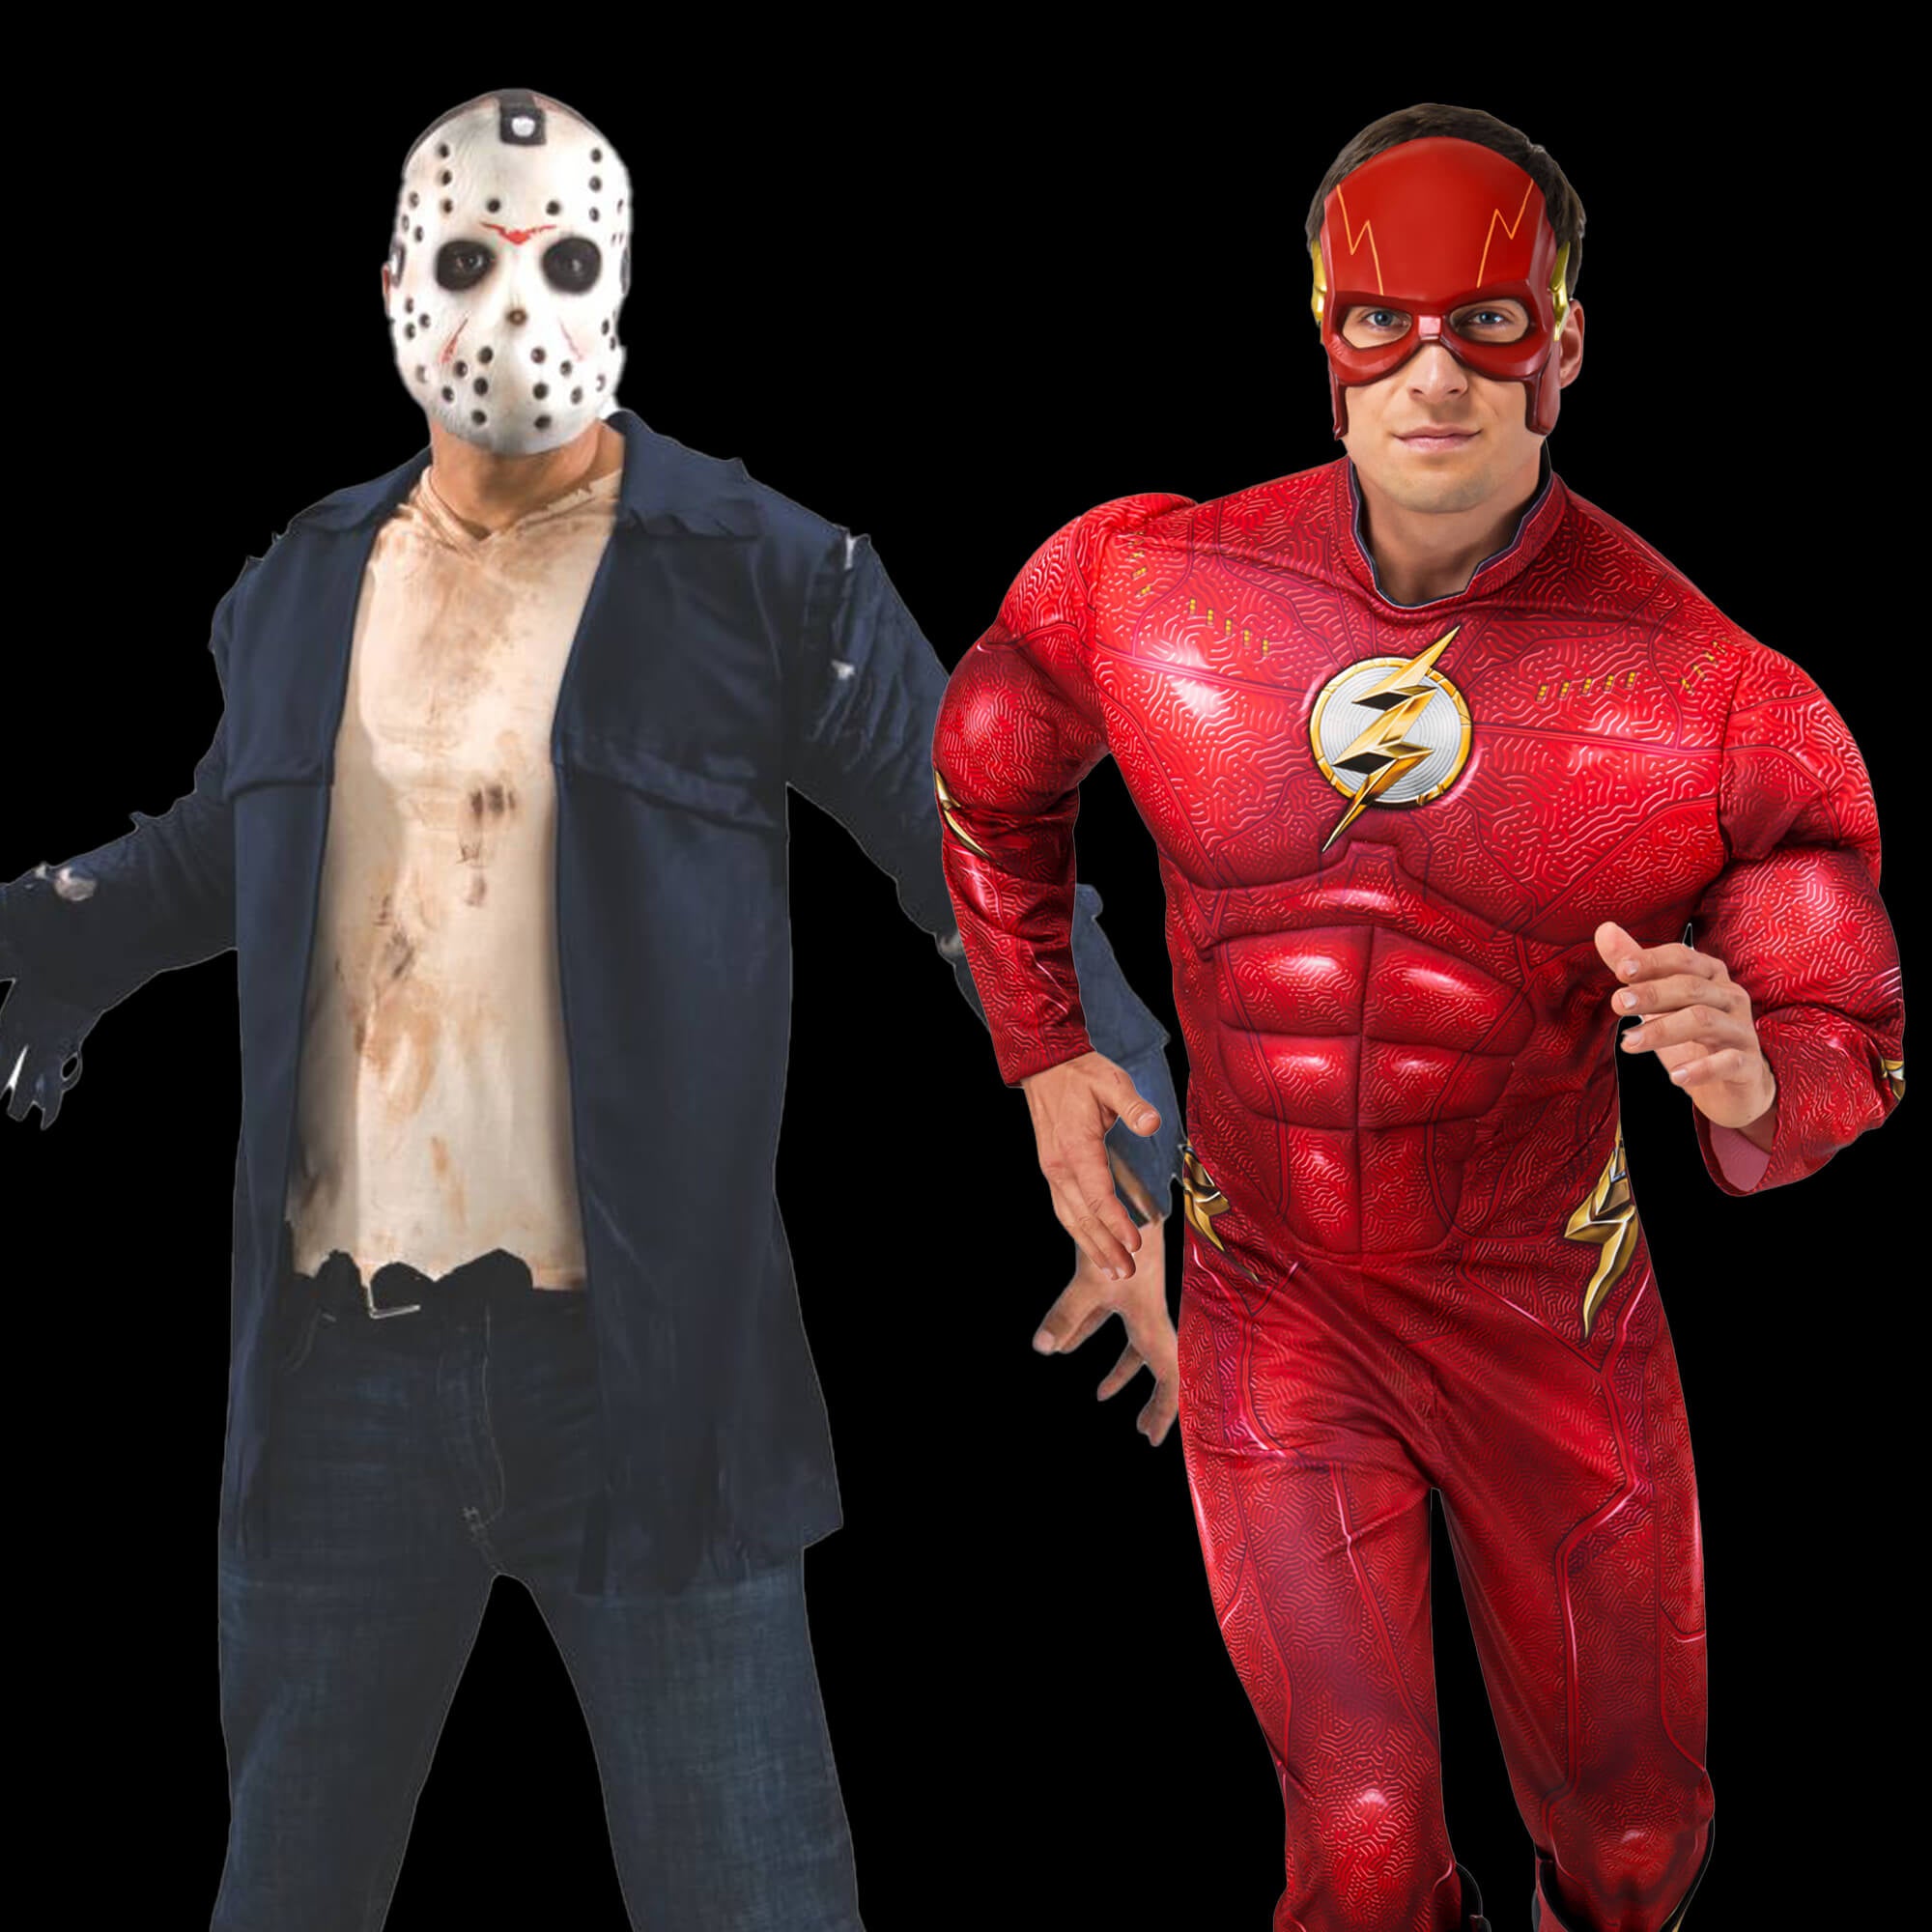 the flash and jason halloween costumes for men